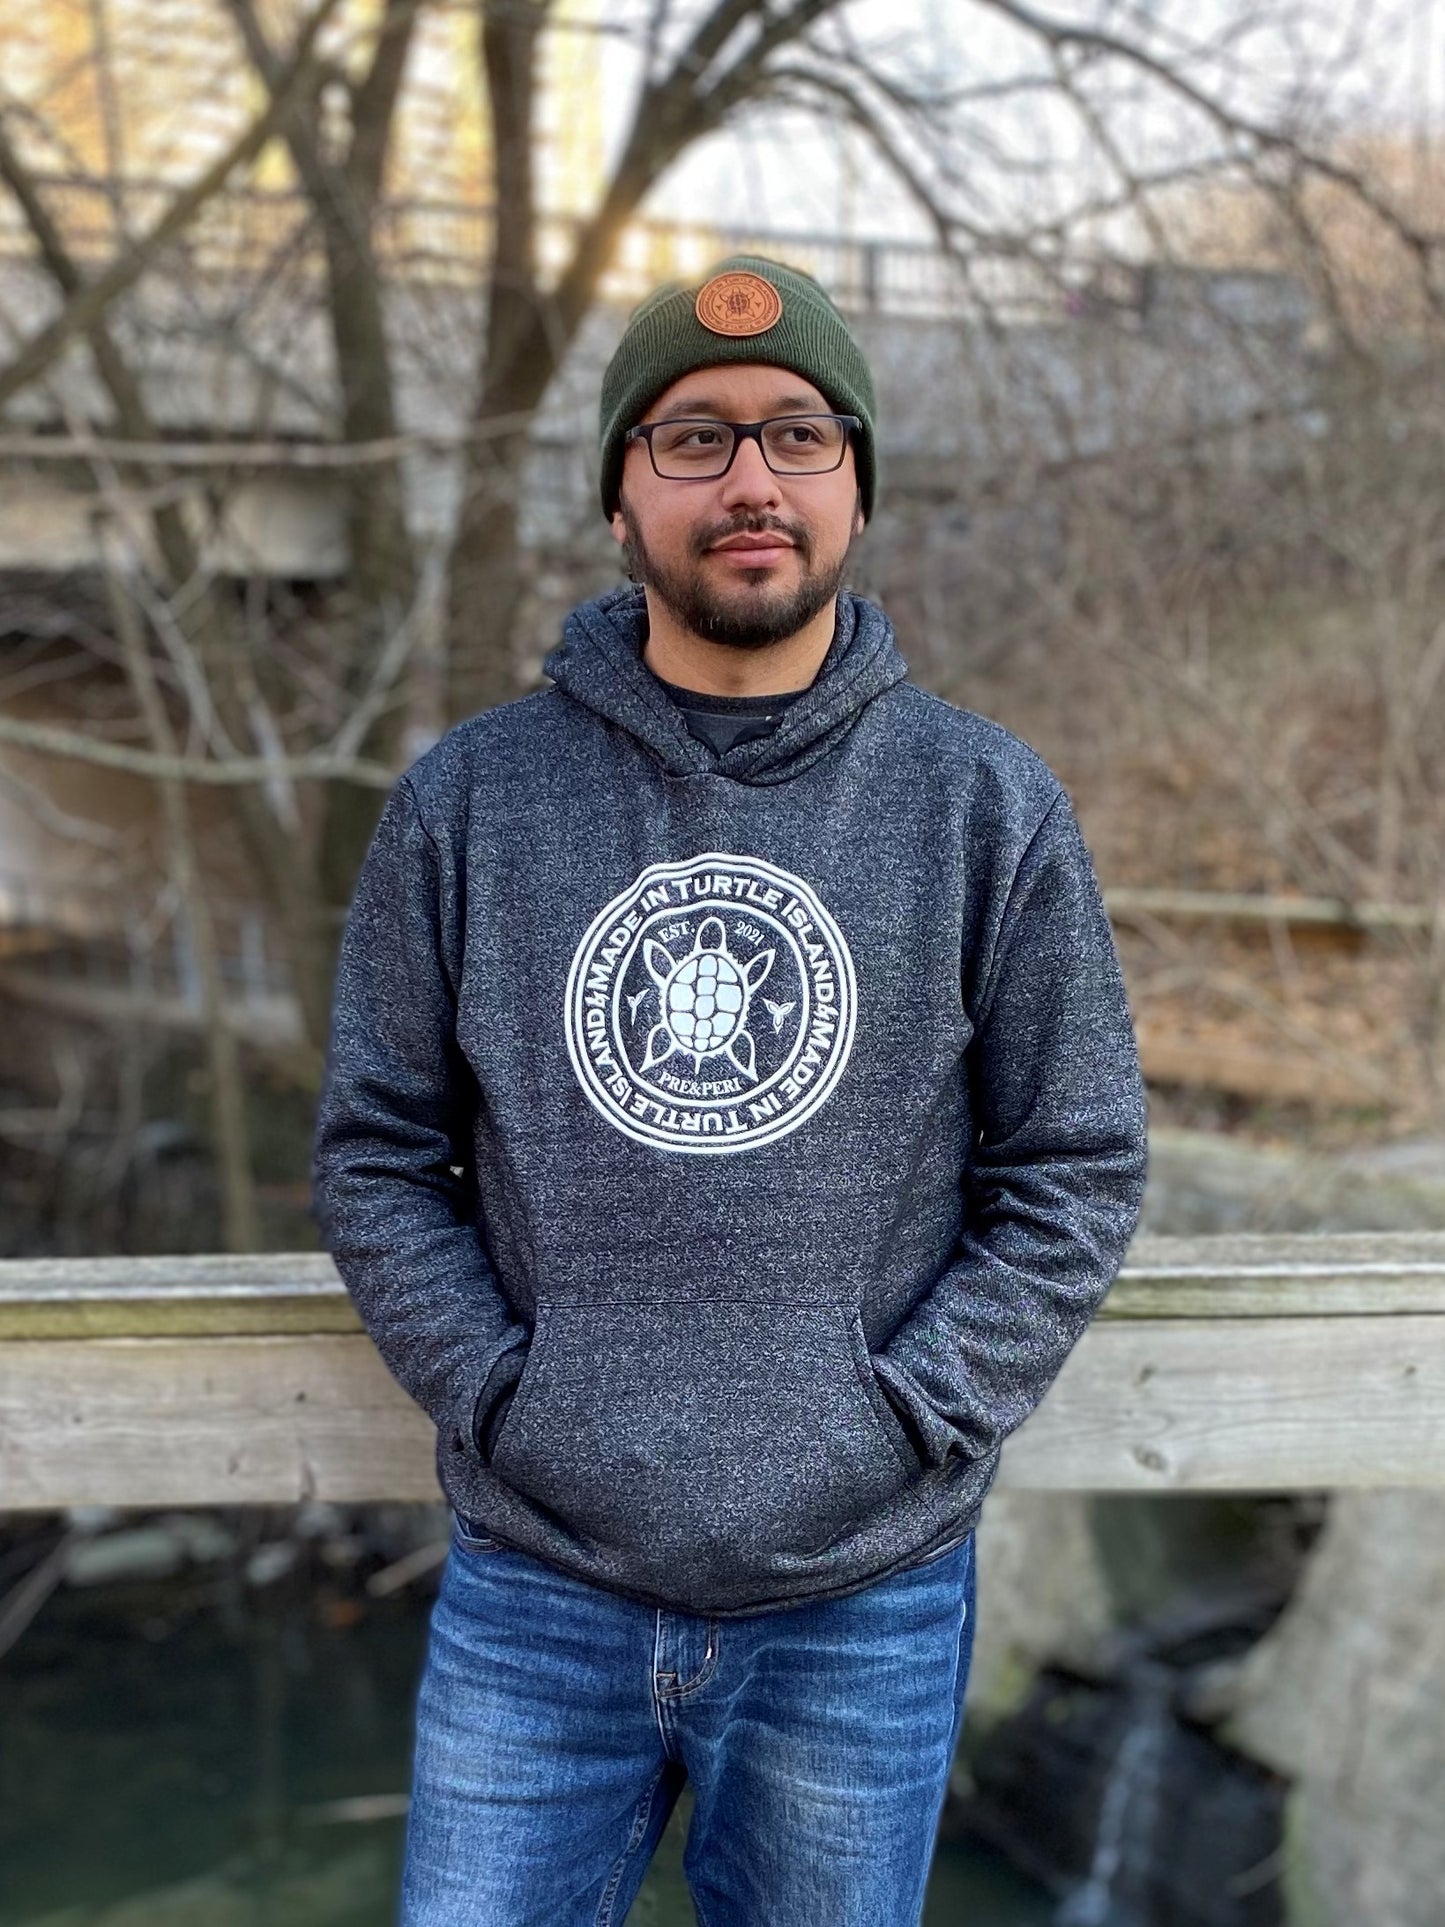 A bearded man wearing glasses, a green toque with tan leather patch, and salt and pepper hoodie with white screen printed graphic featuring a turtle with the words "Made in Turtle Island" around it